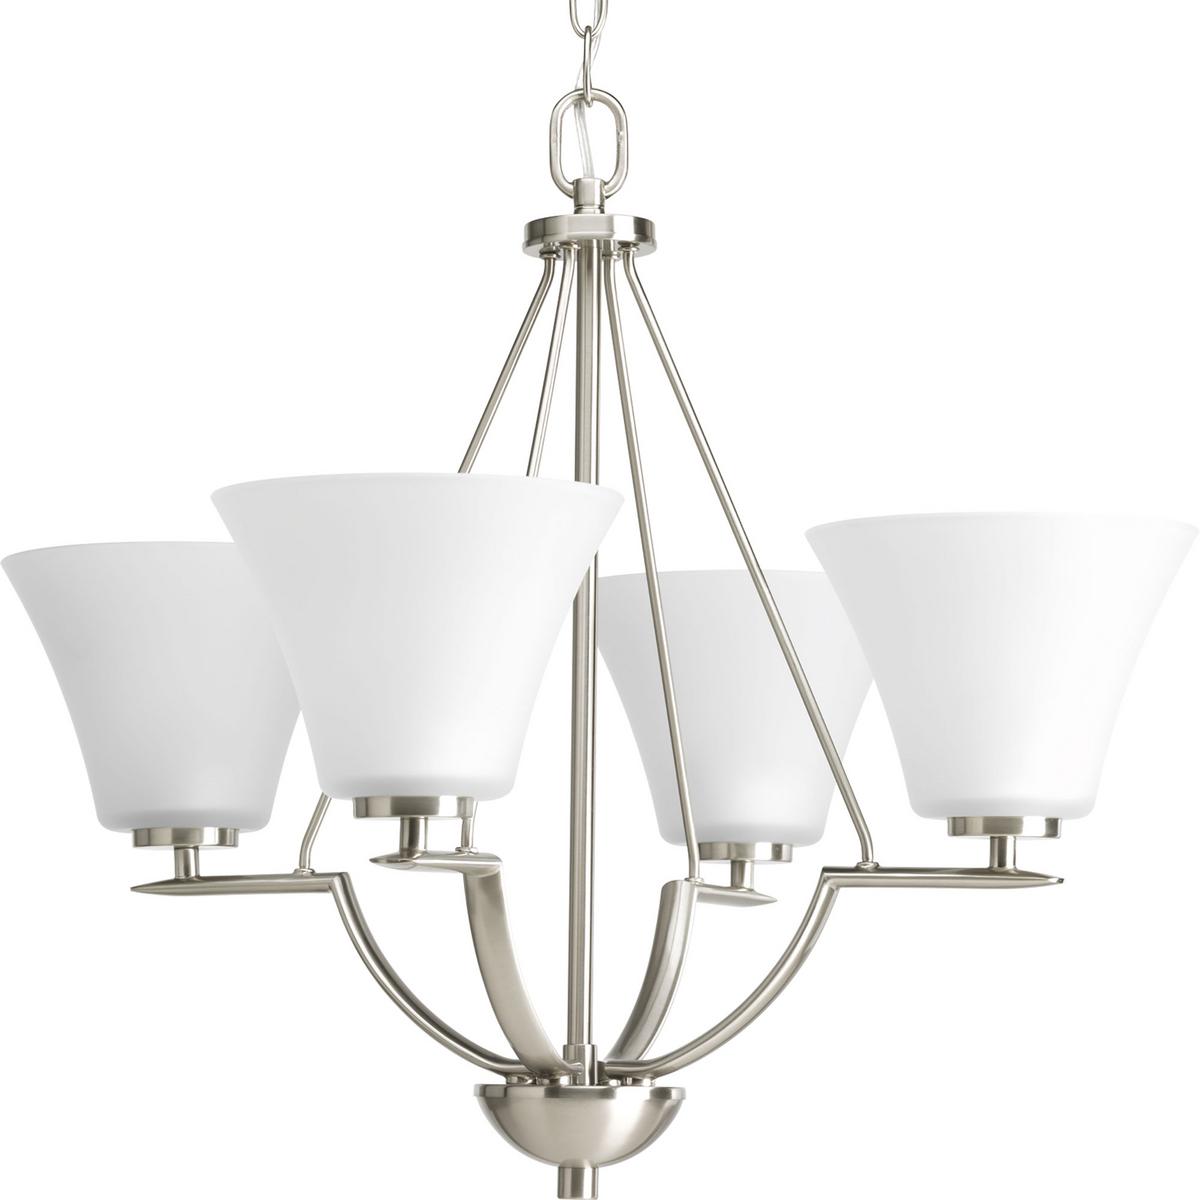 Hubbell P4622-09 Four-light chandelier with white etched glass from the Bravo collection. Linear elements stream throughout the fixture to compose a relaxed but exotic ambiance. Generously scaled glass shades add distinction against the Brushed Nickel finish and provide p